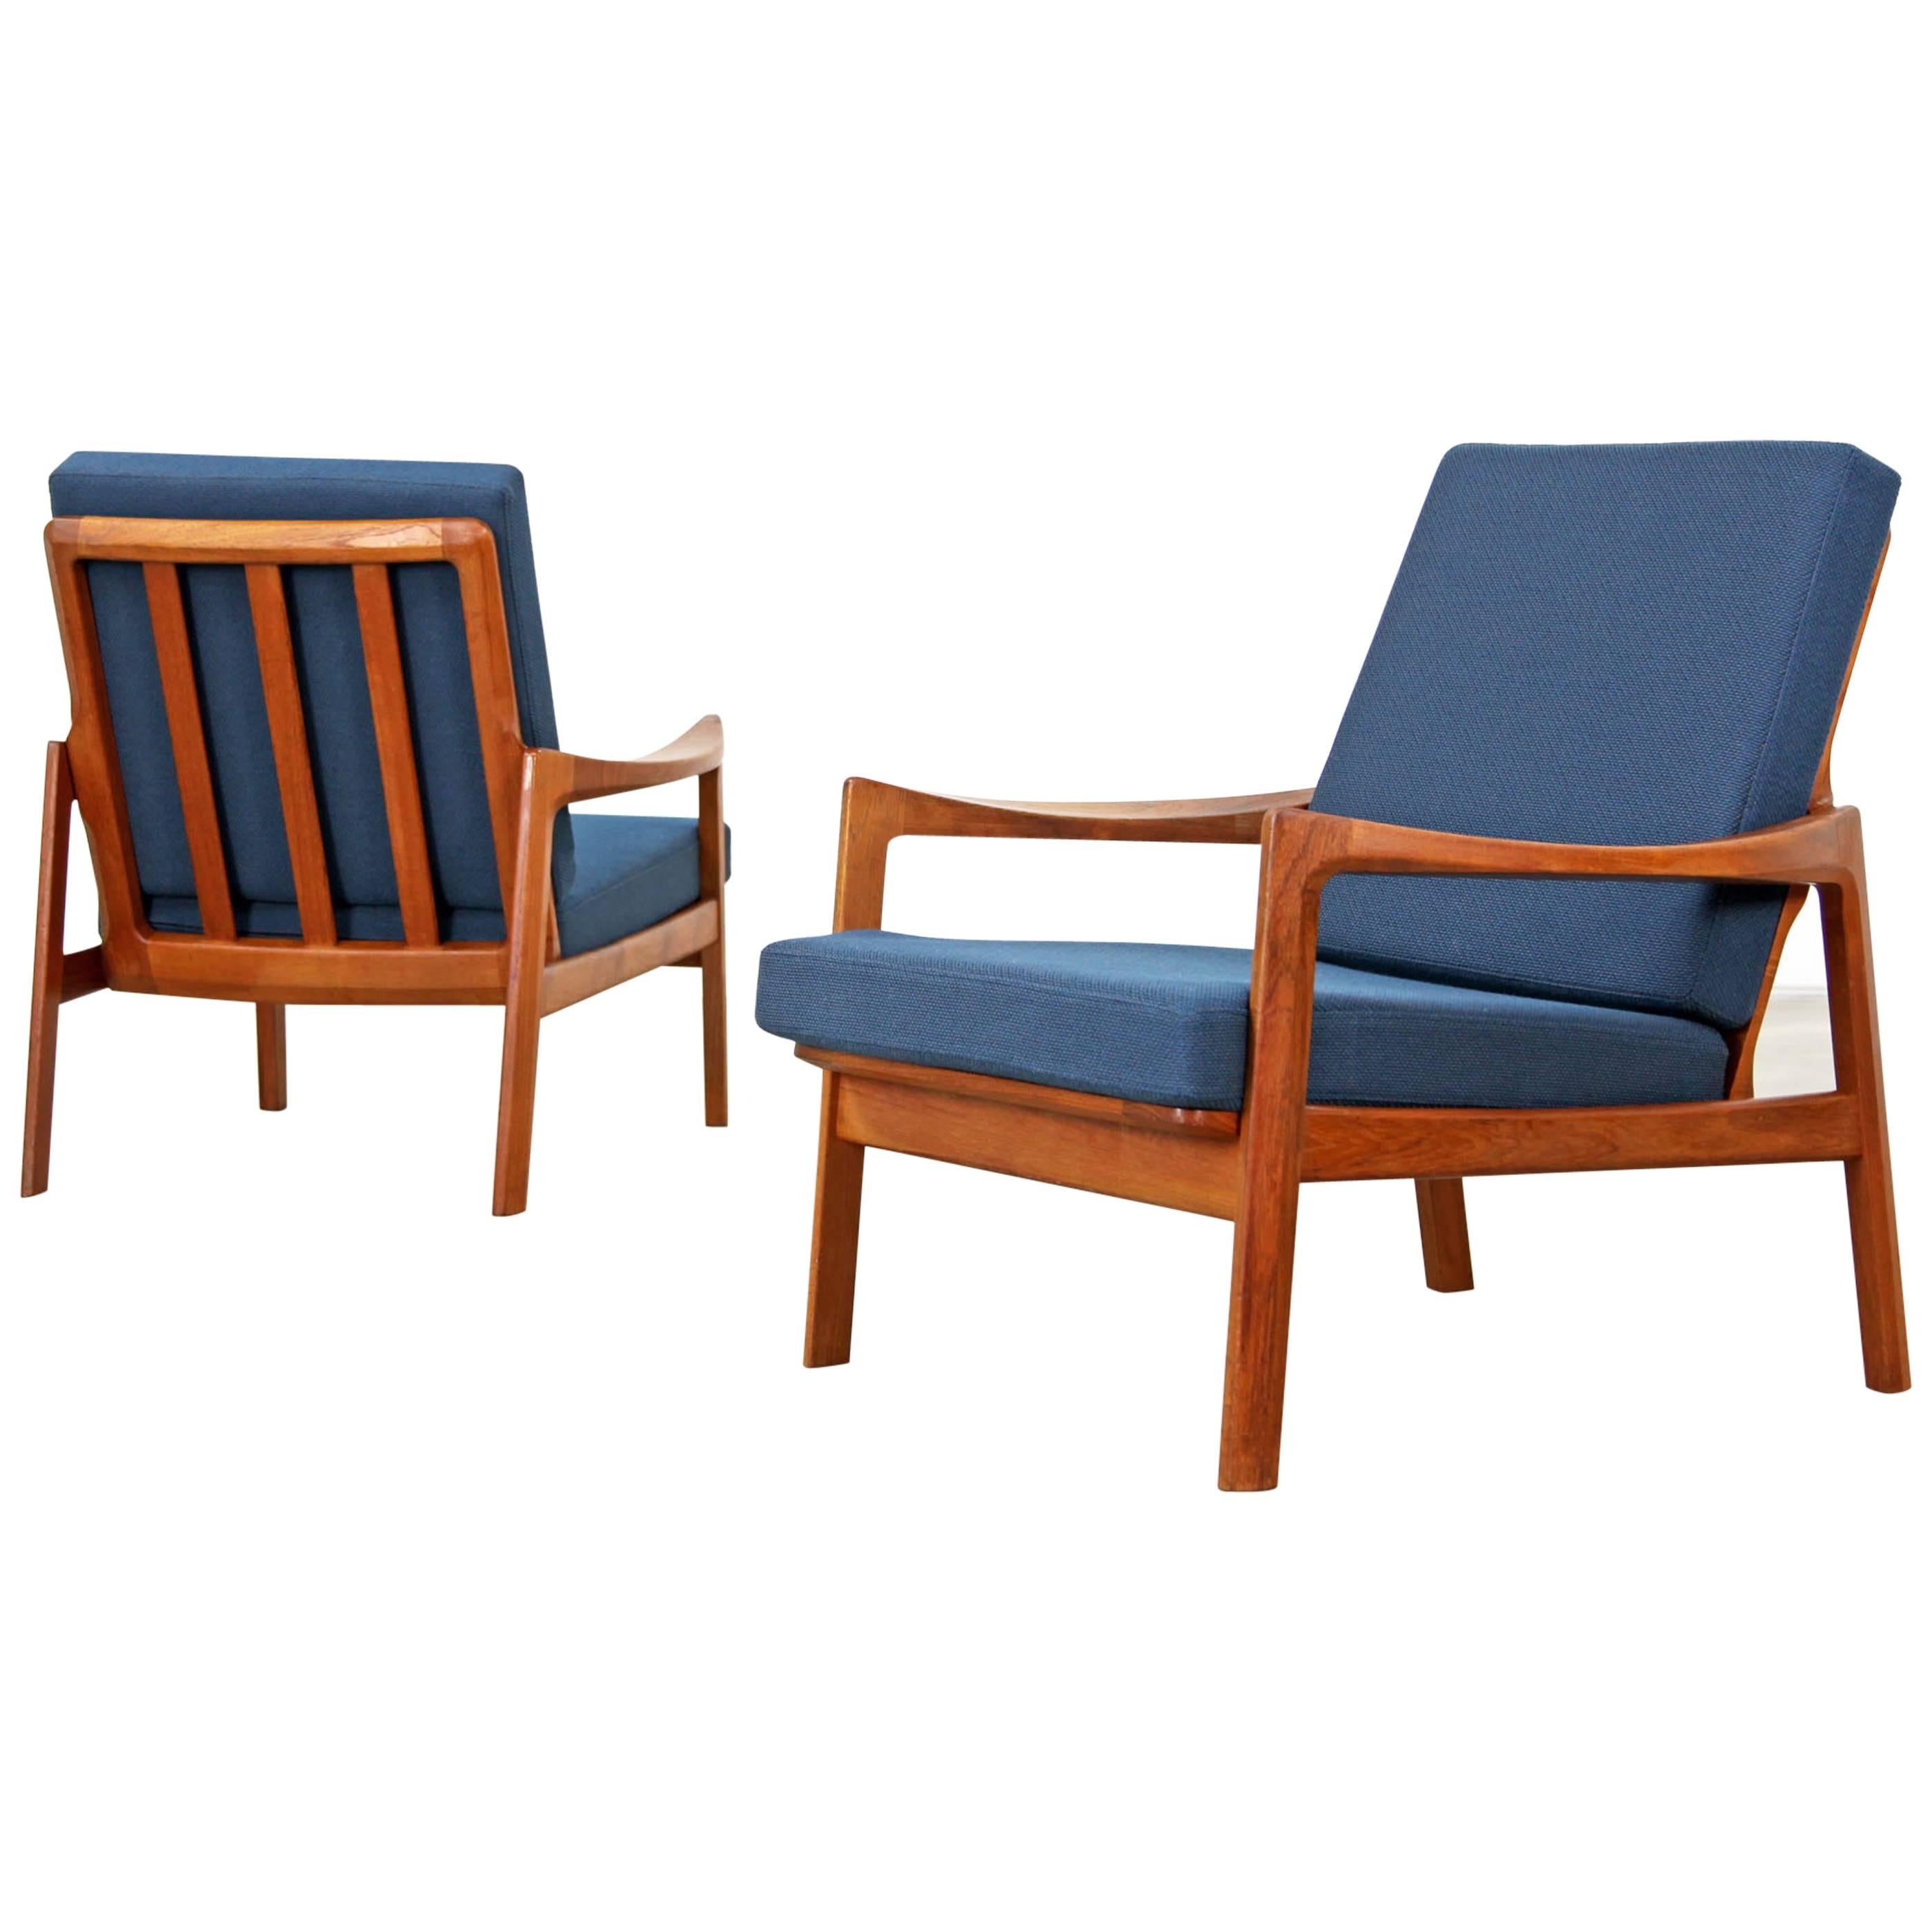 Set of Two Easy Chairs Designed by Tove and Edvard Kind-Larsen